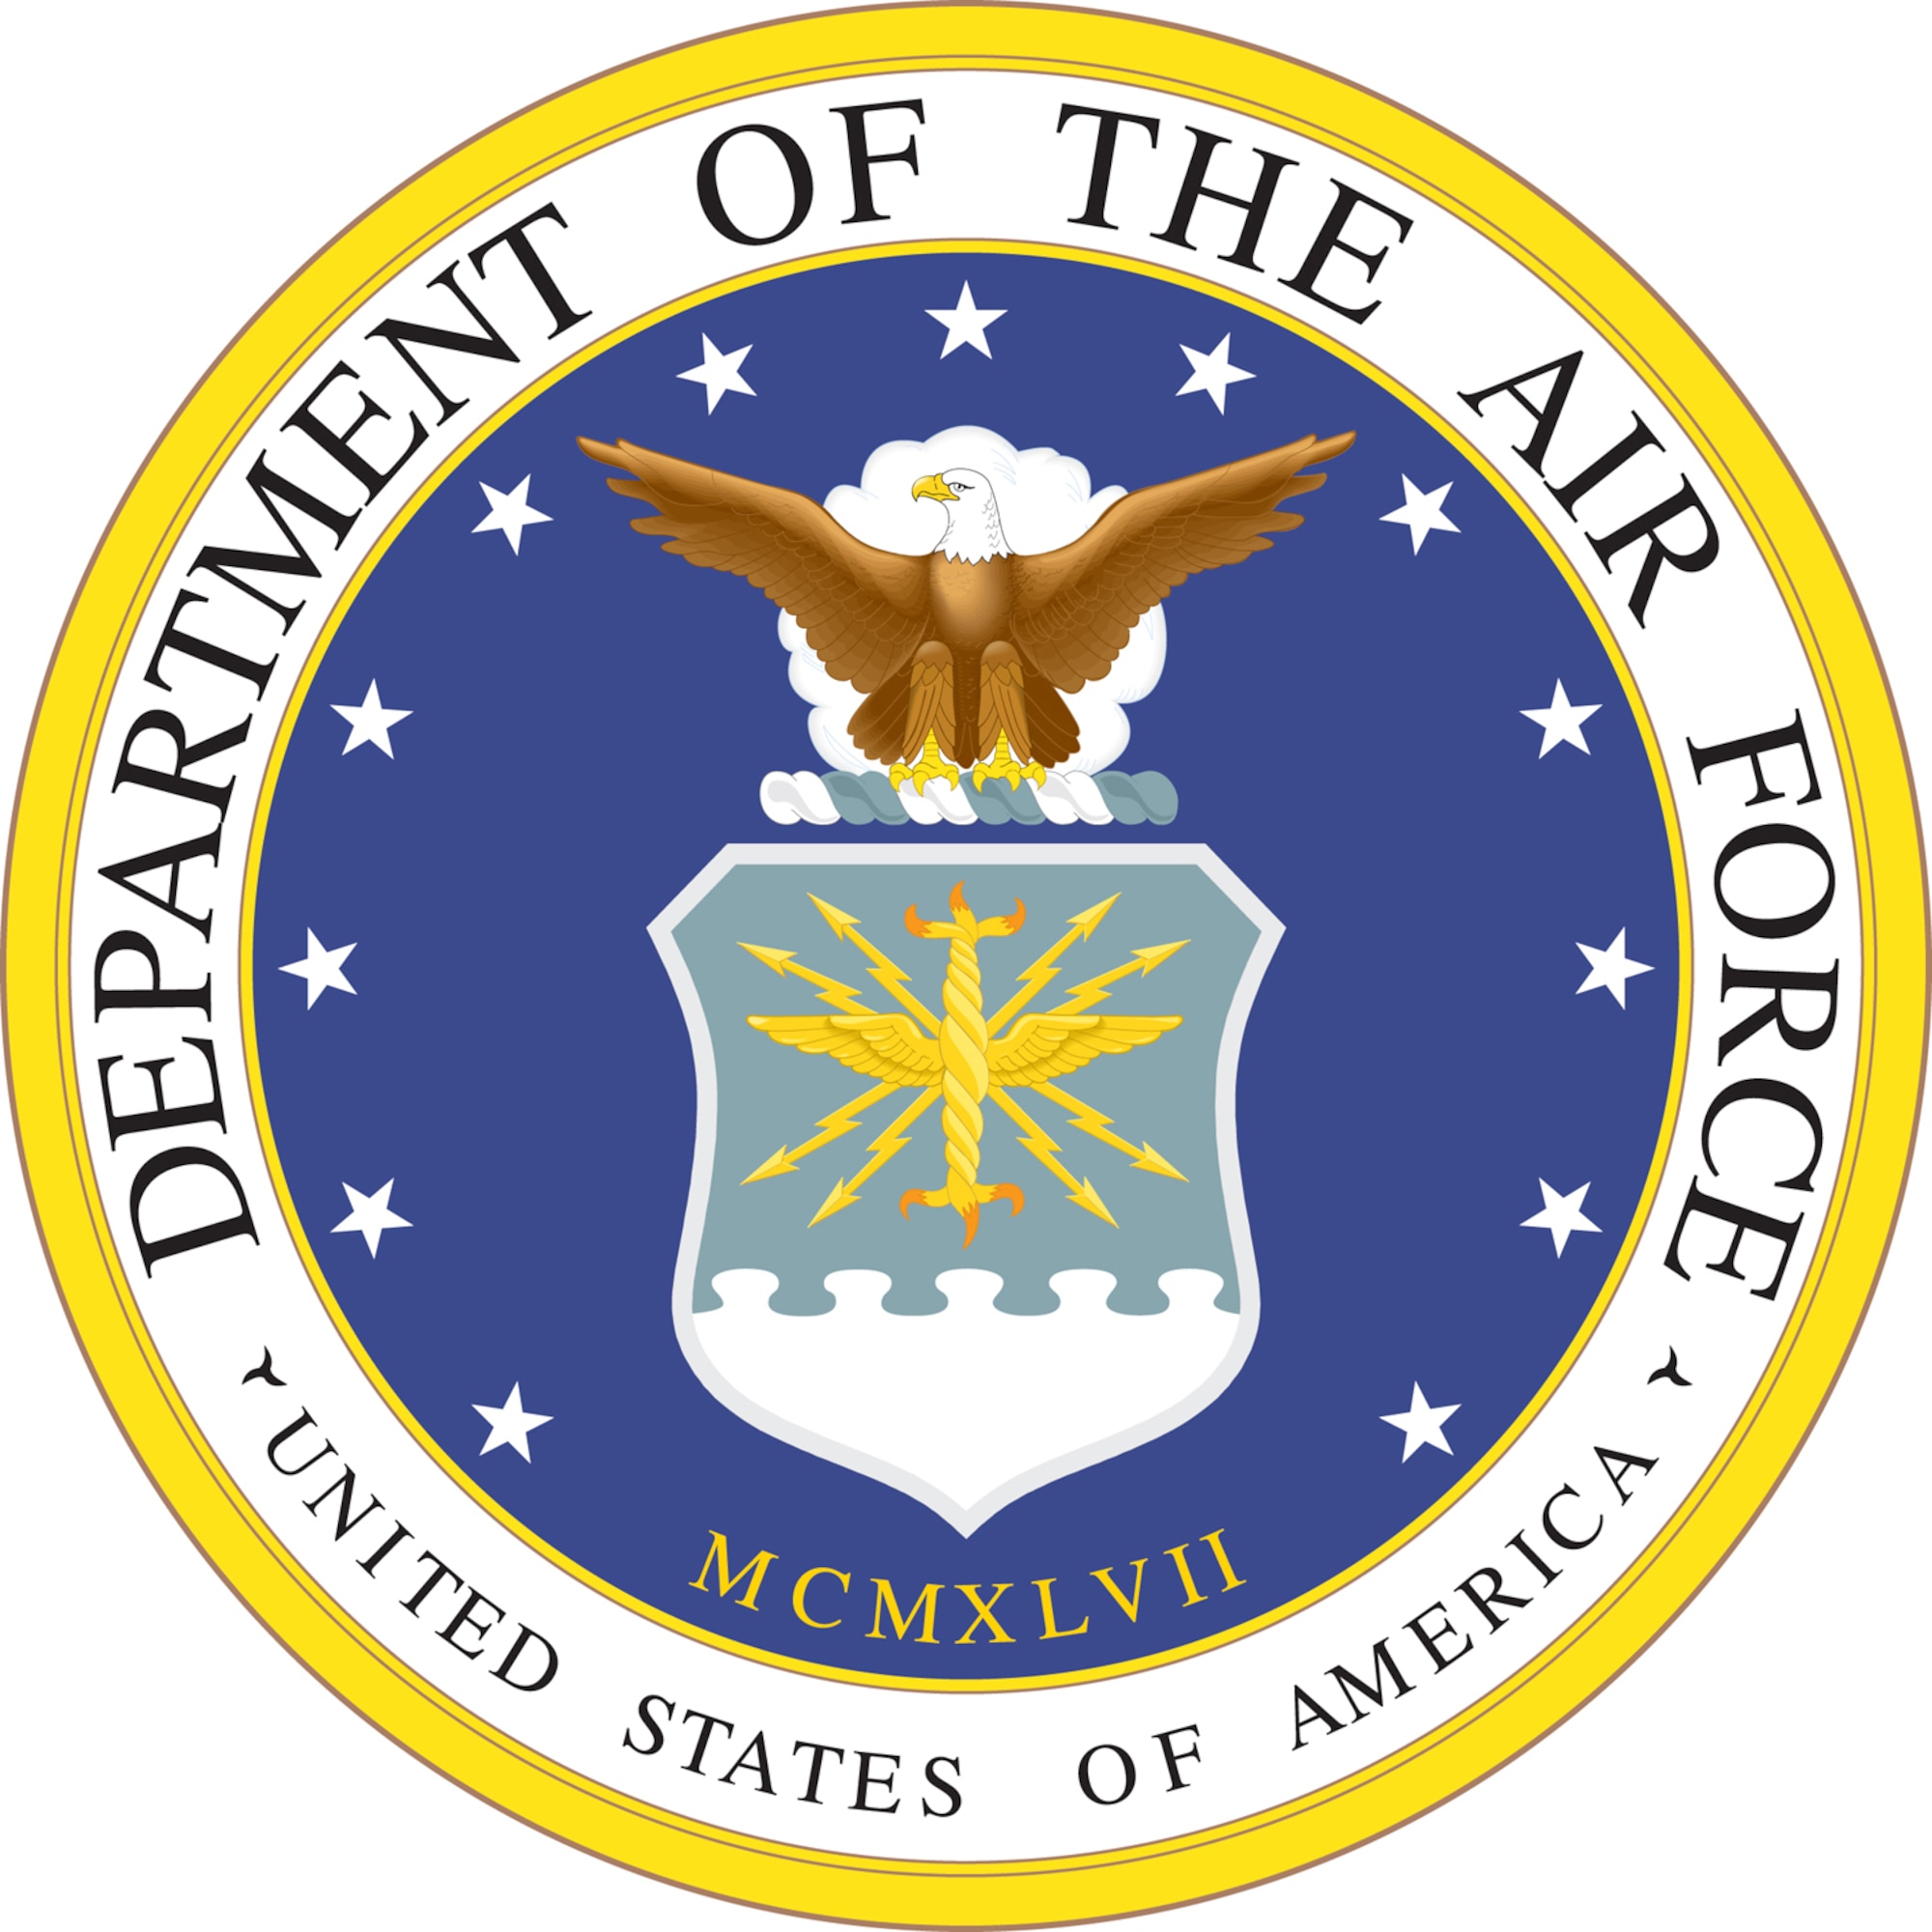 The Department of the Air Force Seal is for official use only. Even when the seal is used for official purposes, it can only be used on: printing issued at departmental-level for general Air Force use; in official Air Force films, videotapes, or television programs; on ceremony programs, certificates, diplomas, invitations, and greetings of an official nature; on memorials or monuments erected or approved by the Department of the Air Force; with any official Air Force exhibit; and on wall plaques at Air Force facilities with the approval of the appropriate commander or agency chief. Uses not specified above are not authorized.